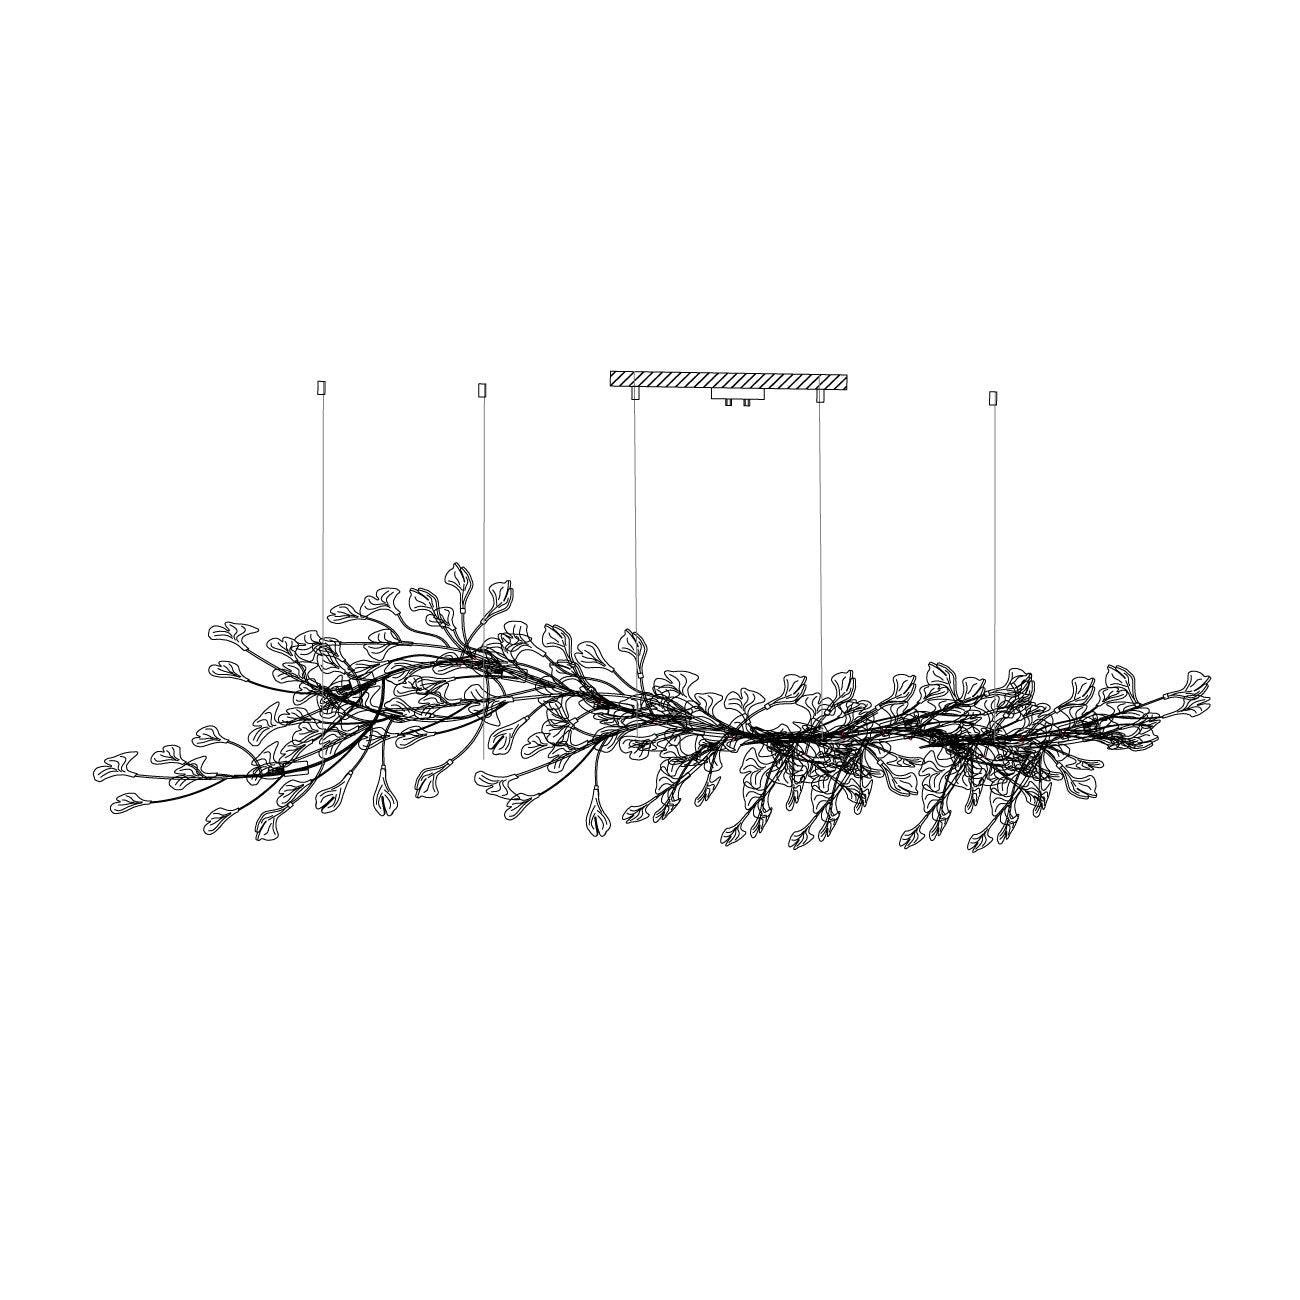 White Lamp Body and Leaf Gingko Chandelier in E L 98.4" x H 29.5" (L 250cm x H 75cm) Dimensions